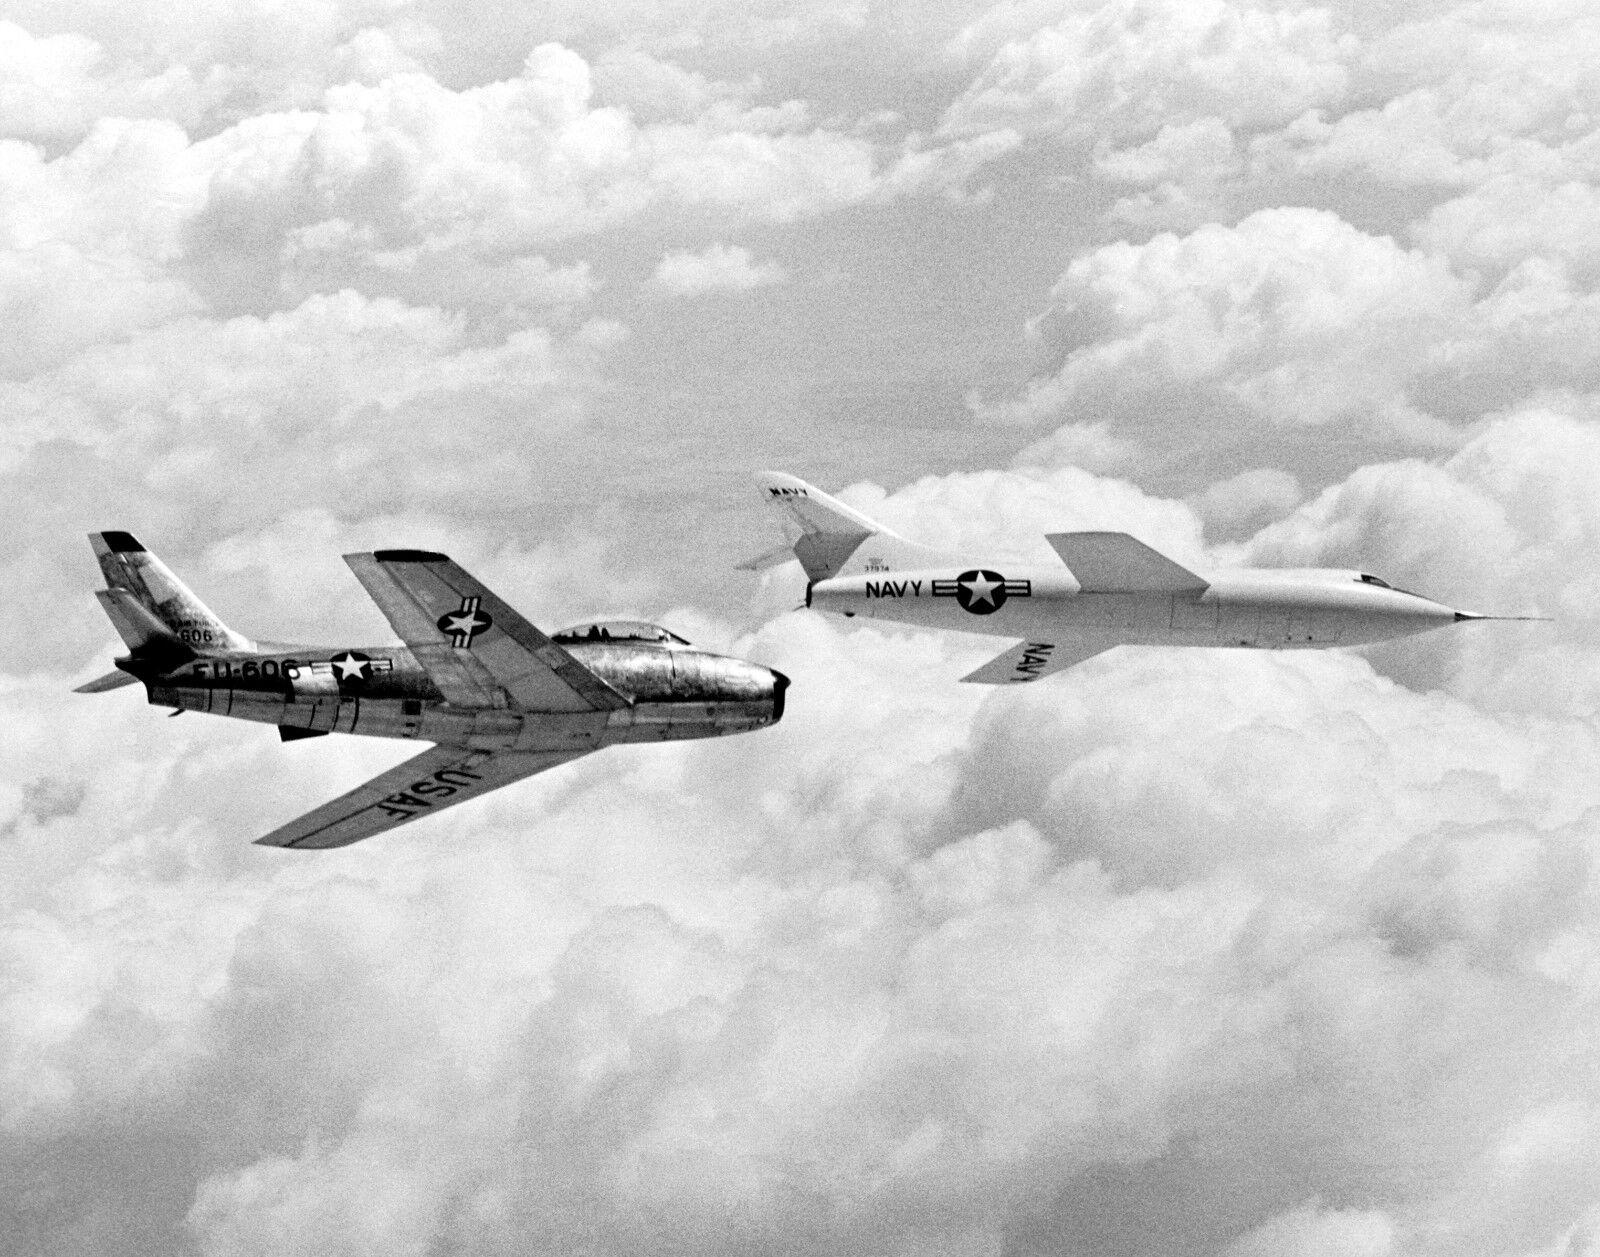 DOUGLAS D-558-2 AND NORTH AMERICAN F-86 SABRE IN FLIGHT - 8X10 PHOTO (EP-124)